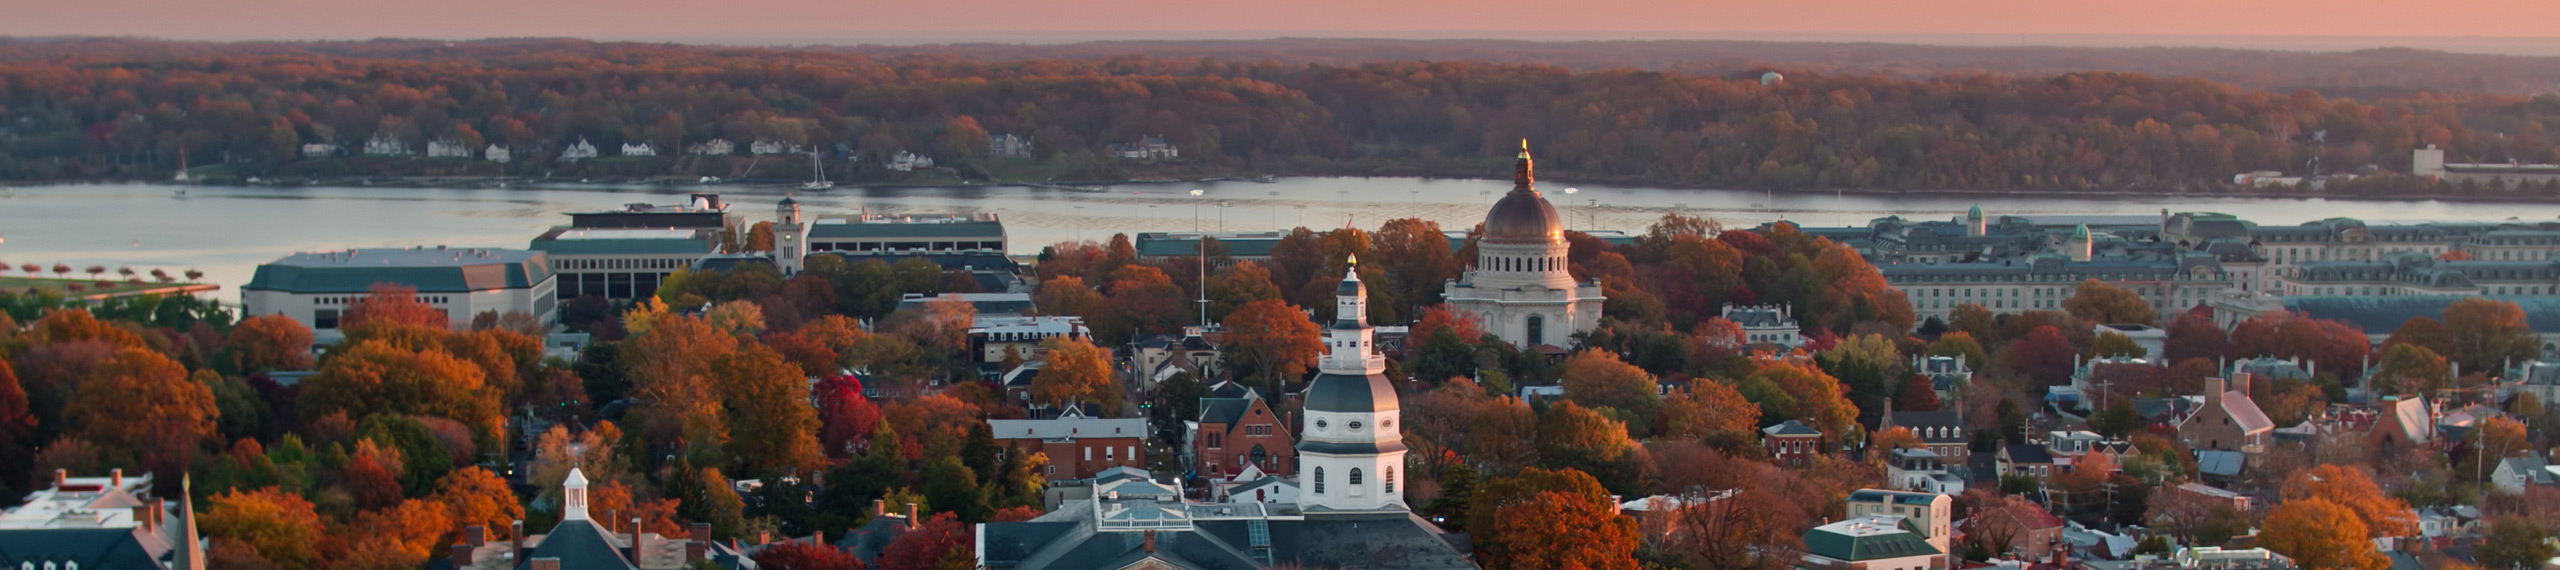 Panoramic view of Annapolis, MD, one of the cities served by MOVES mobile veterinary specialists in Maryland.